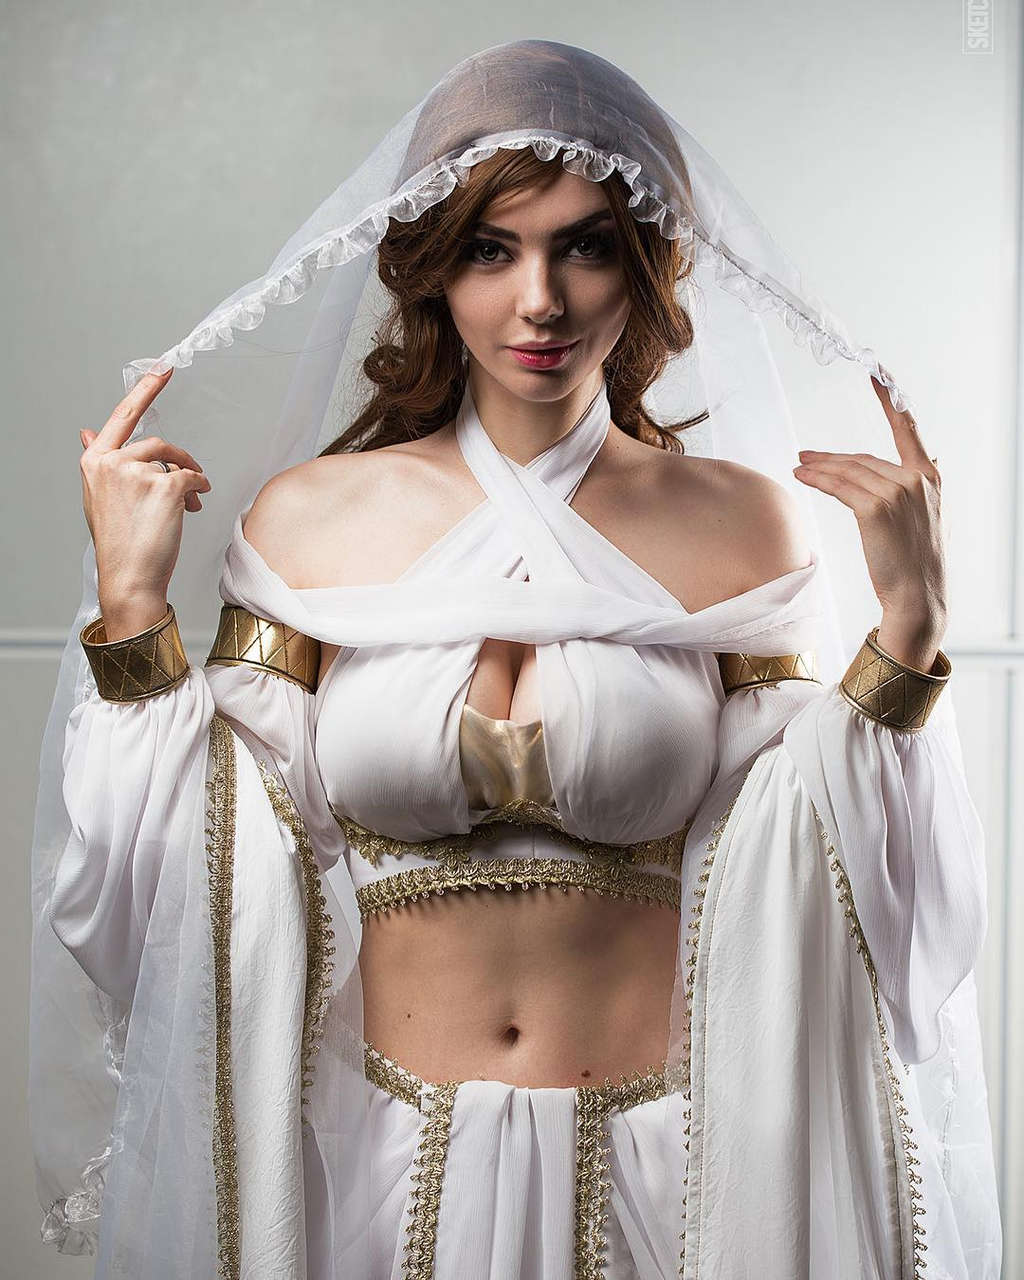 Gwynevere From Dark Souls Cosplay By M Mell